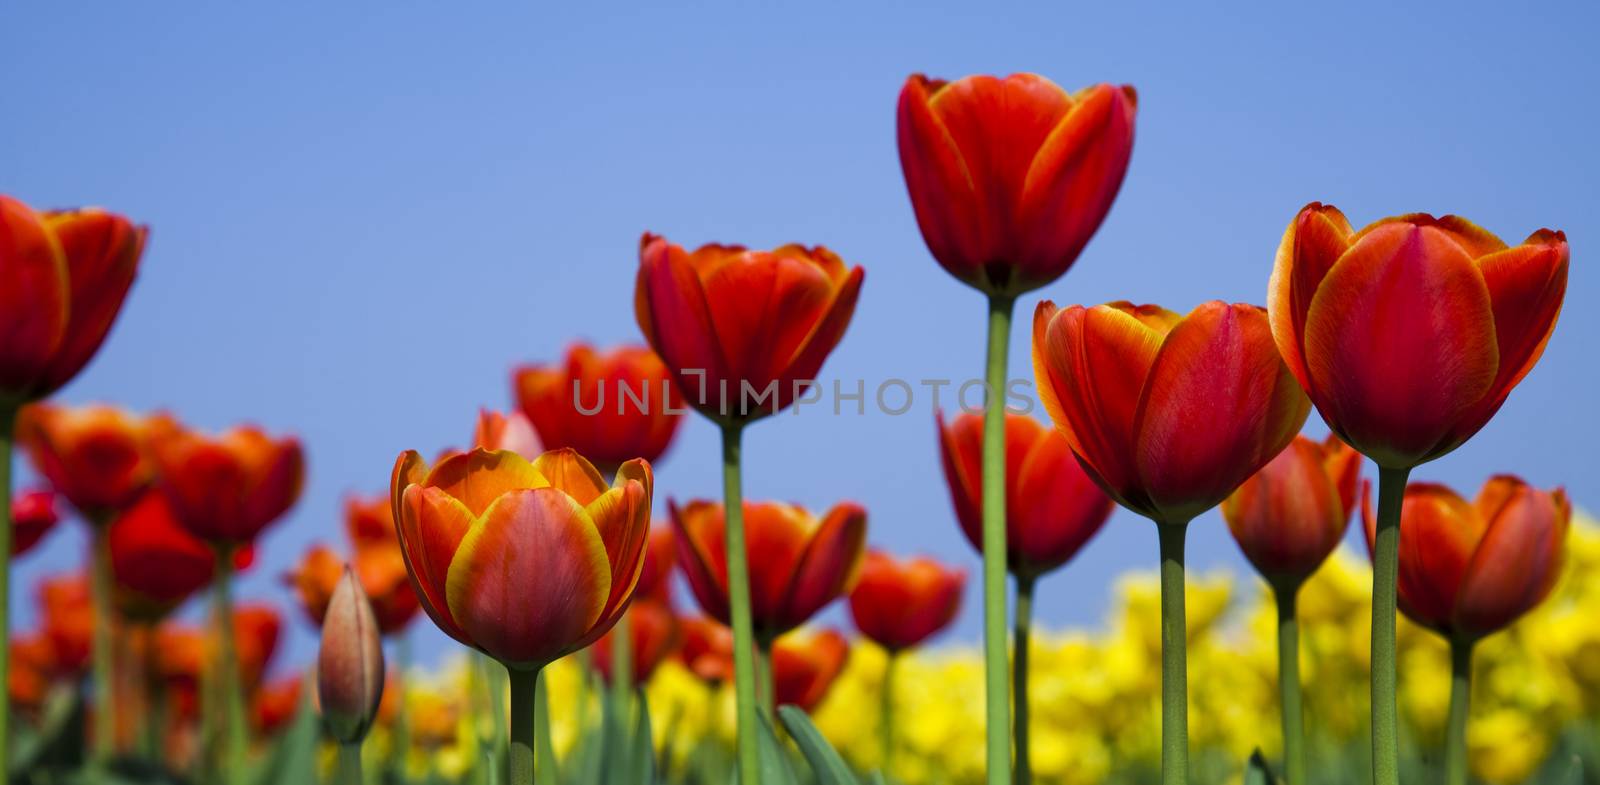 Field of tulips, colorful background by JanPietruszka